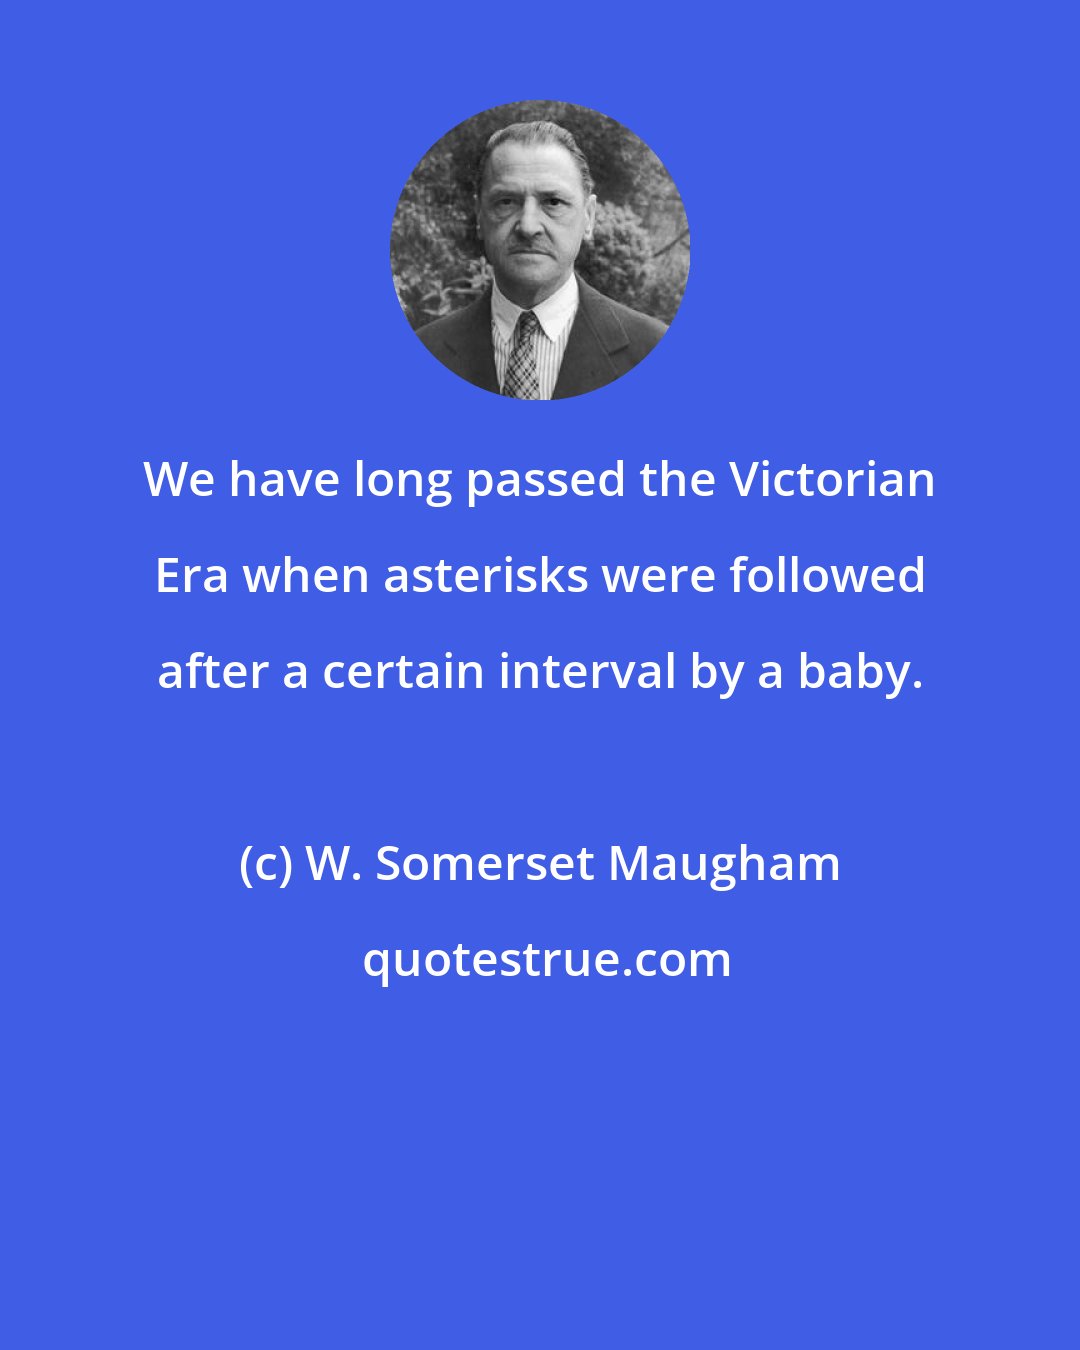 W. Somerset Maugham: We have long passed the Victorian Era when asterisks were followed after a certain interval by a baby.